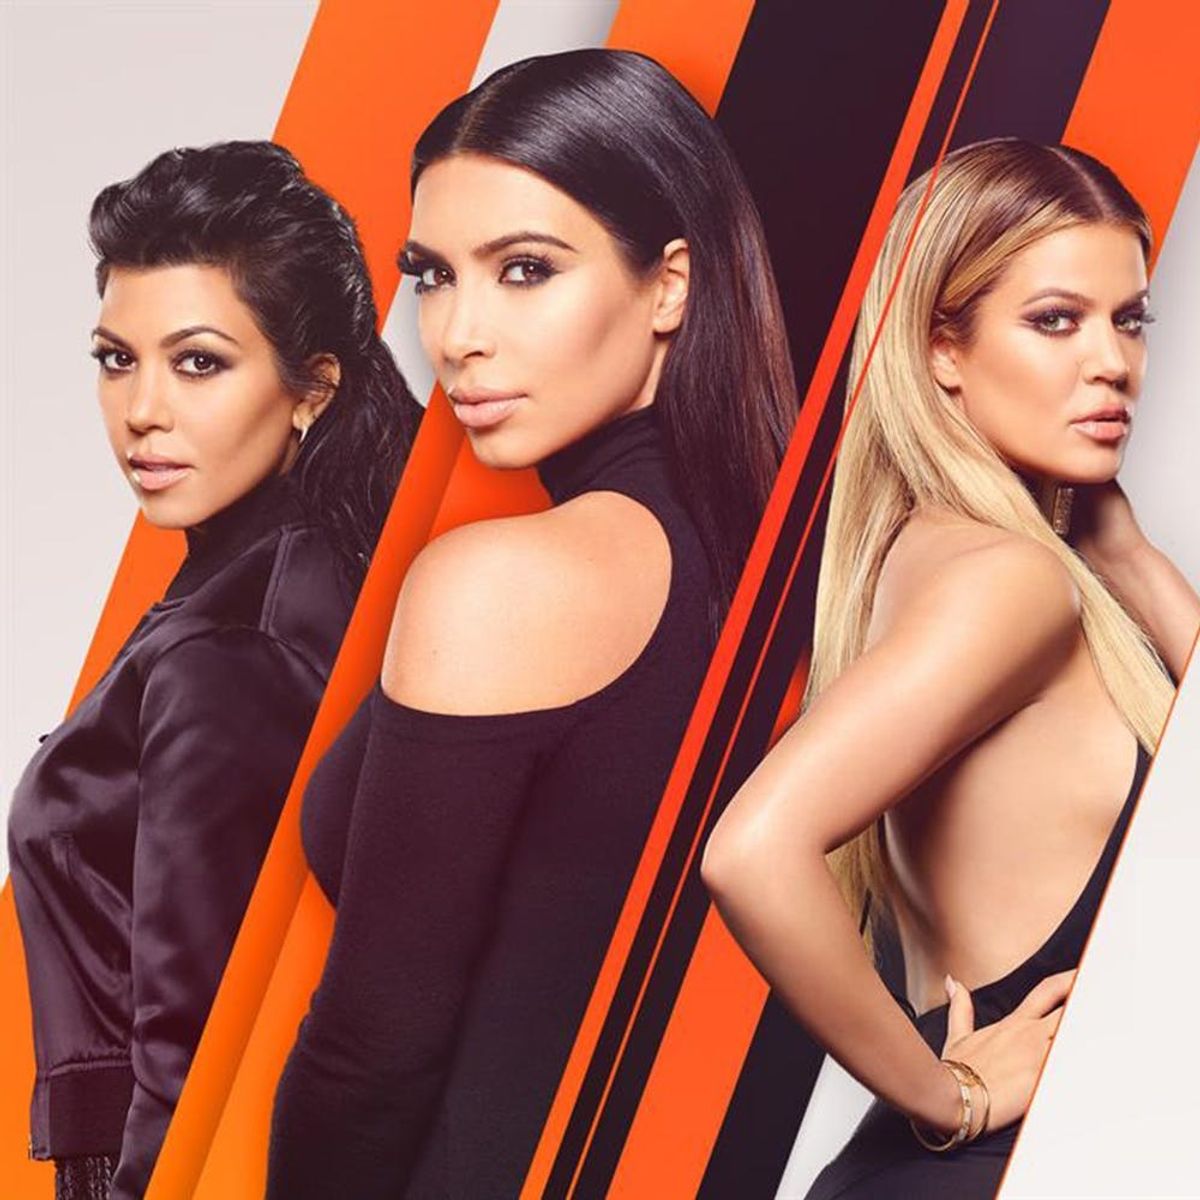 Stream These 4 Shows While You’re Waiting to Keep Up With the Kardashians